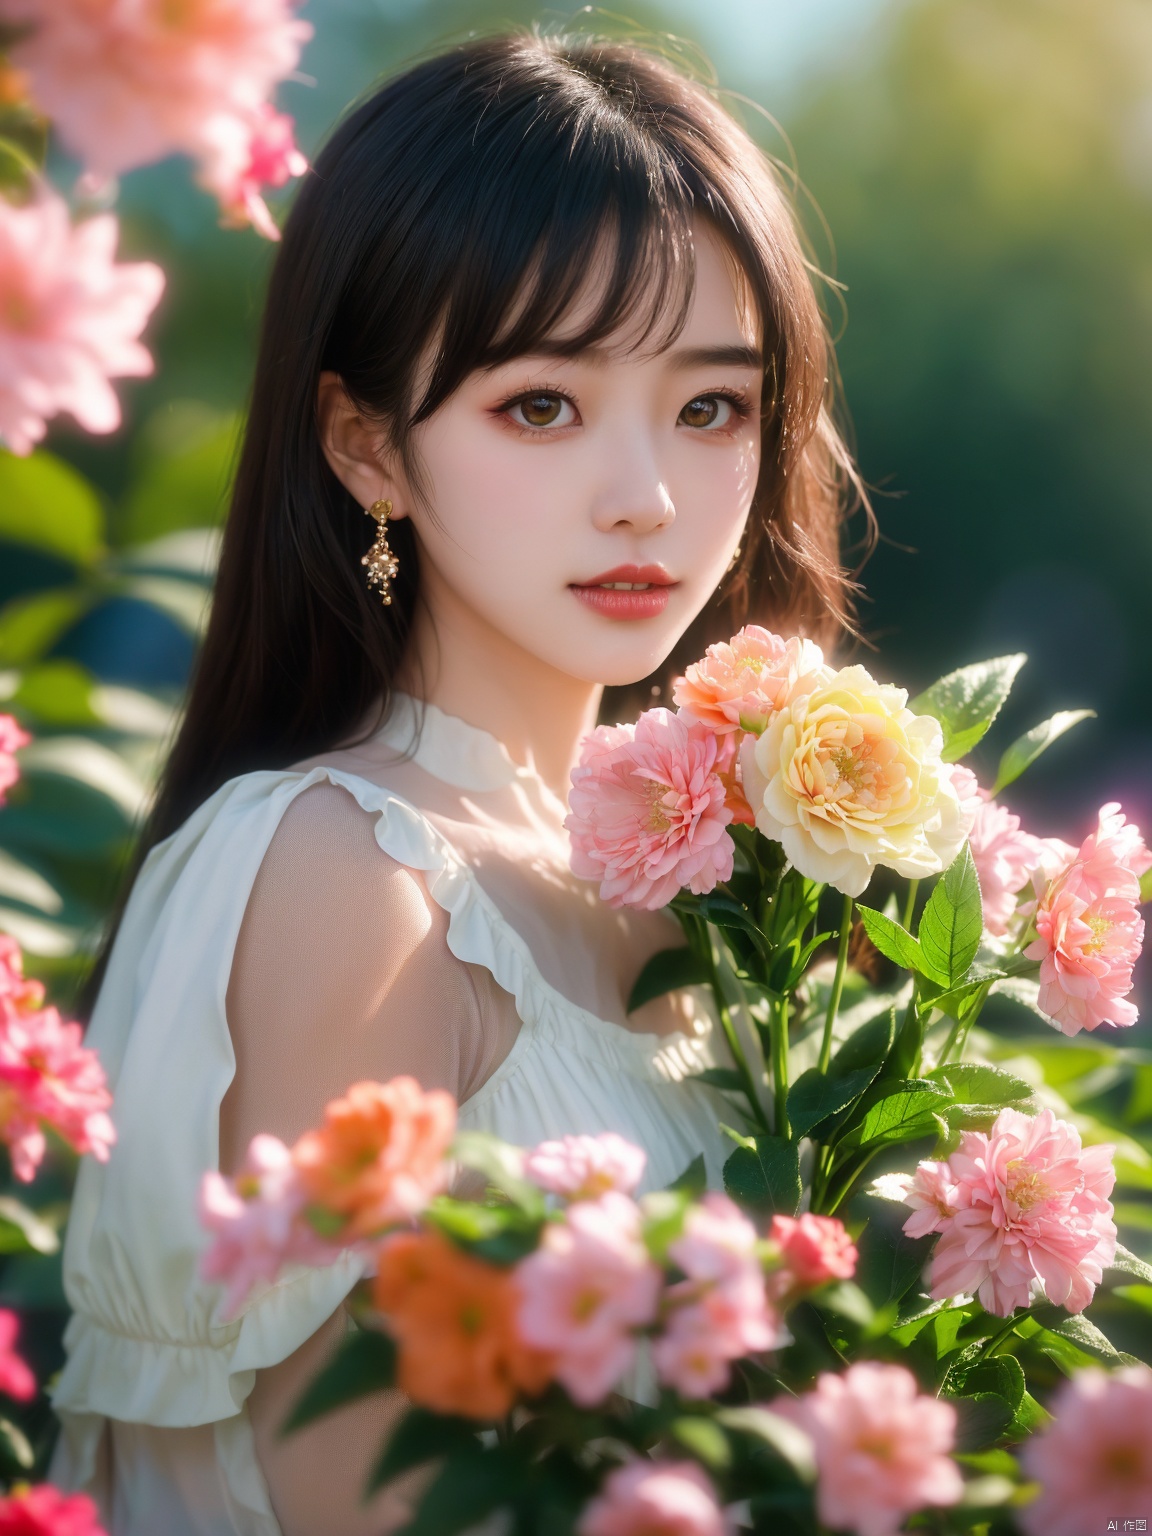  1girl,yuzu,qingsha,medium shot,solo,emotional_face,flower dress,flower armor,looking_at_viewer,green_theme,colorful blooming flowers,forming a dreamlike world,flower_garden,flowers everywhere,greens,pinks,bokeh,cinematic,exposure blend,(teal and orange:0.85),(muted_colors, dim_colors, soothing_tones:1.3),high contrast,low saturation,(Canon RF 85mm f/1.2L),tifa,huolinger,glint sparkle,pantyhose,xinniang,eyesseye,21yo girl,ajkds,yunbin,